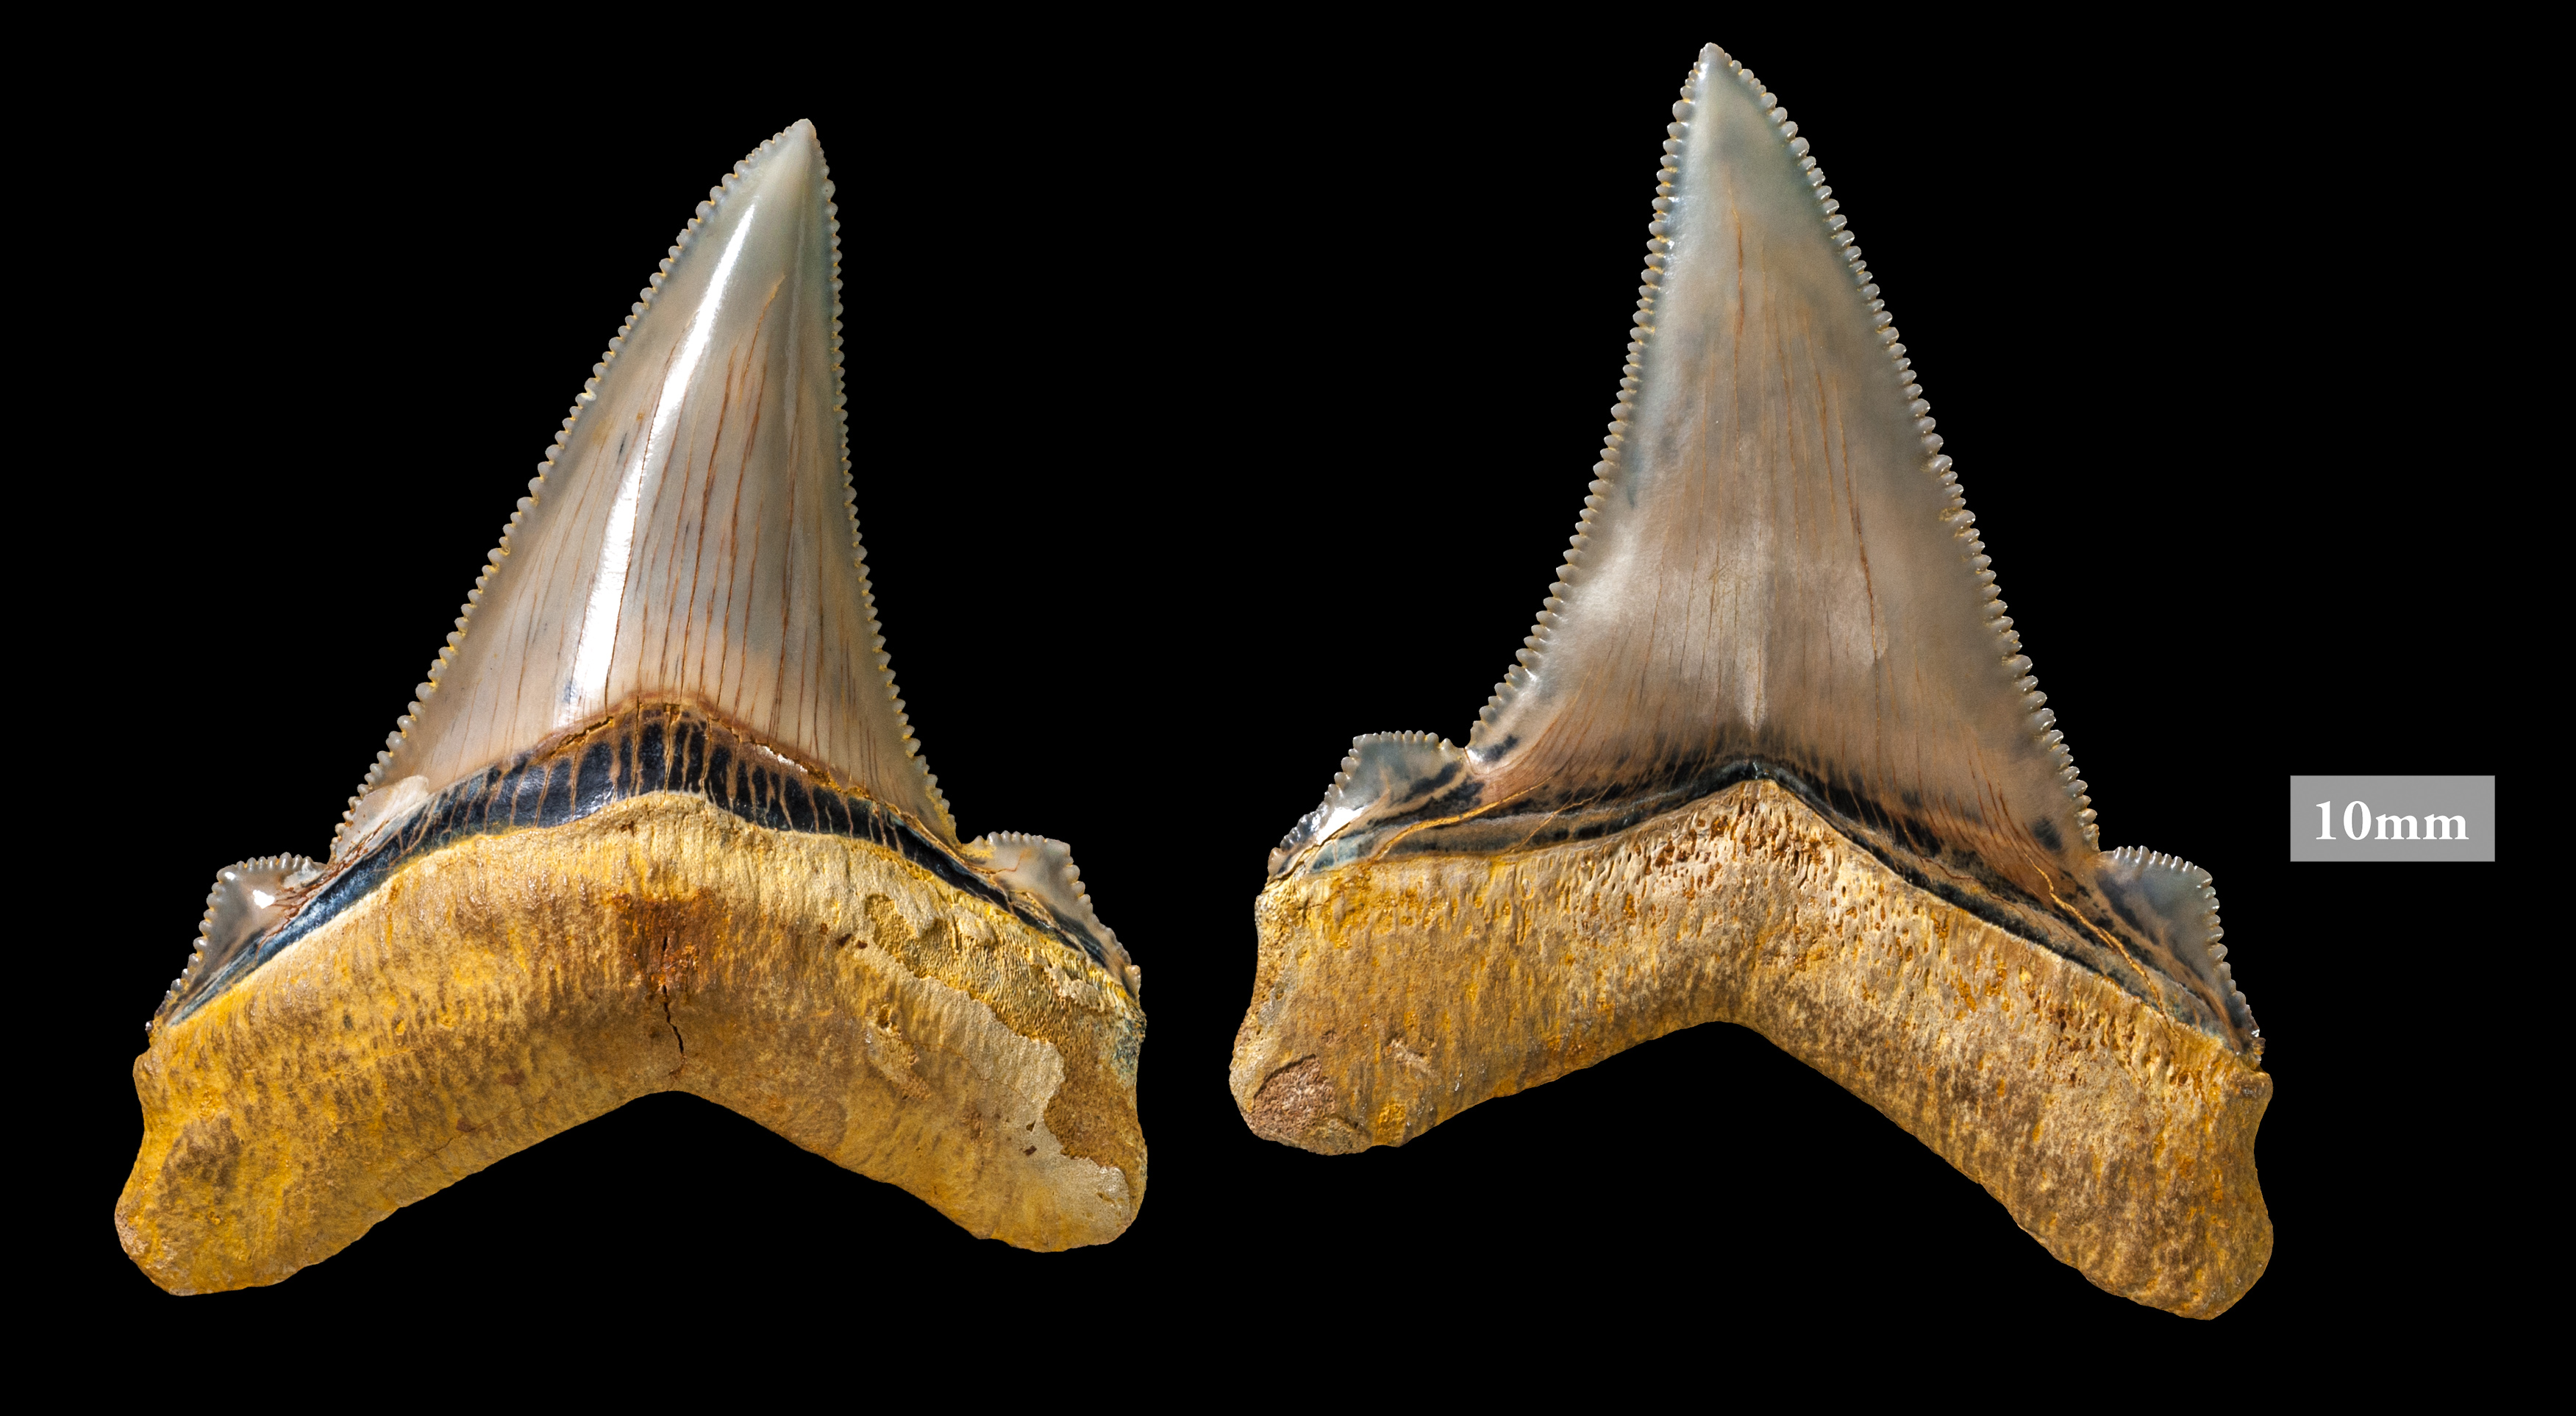 Victorian Fossil Find Uncovers Prehistoric Leftovers of Colossal Shark